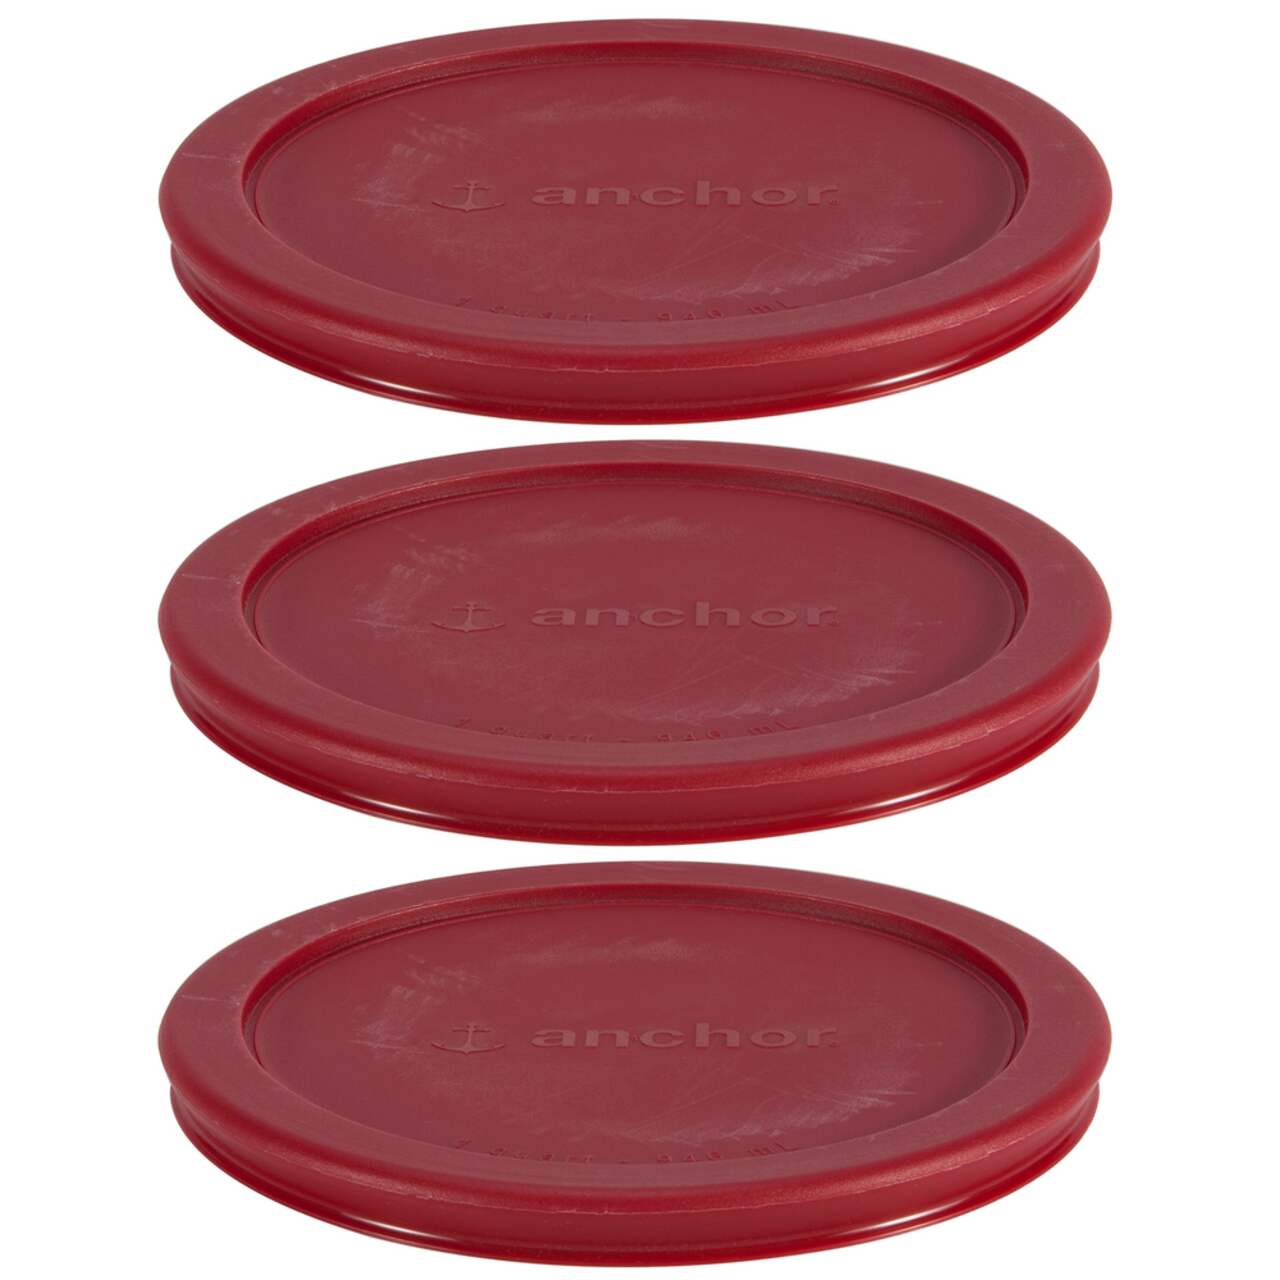 https://media-www.canadiantire.ca/product/living/kitchen/bakeware-baking-prep/1421660/anchor-hocking-3-piece-x-4-cup-red-lid-dfbe91cc-fbbe-40d5-8667-e30562e84b0e.png?imdensity=1&imwidth=640&impolicy=mZoom